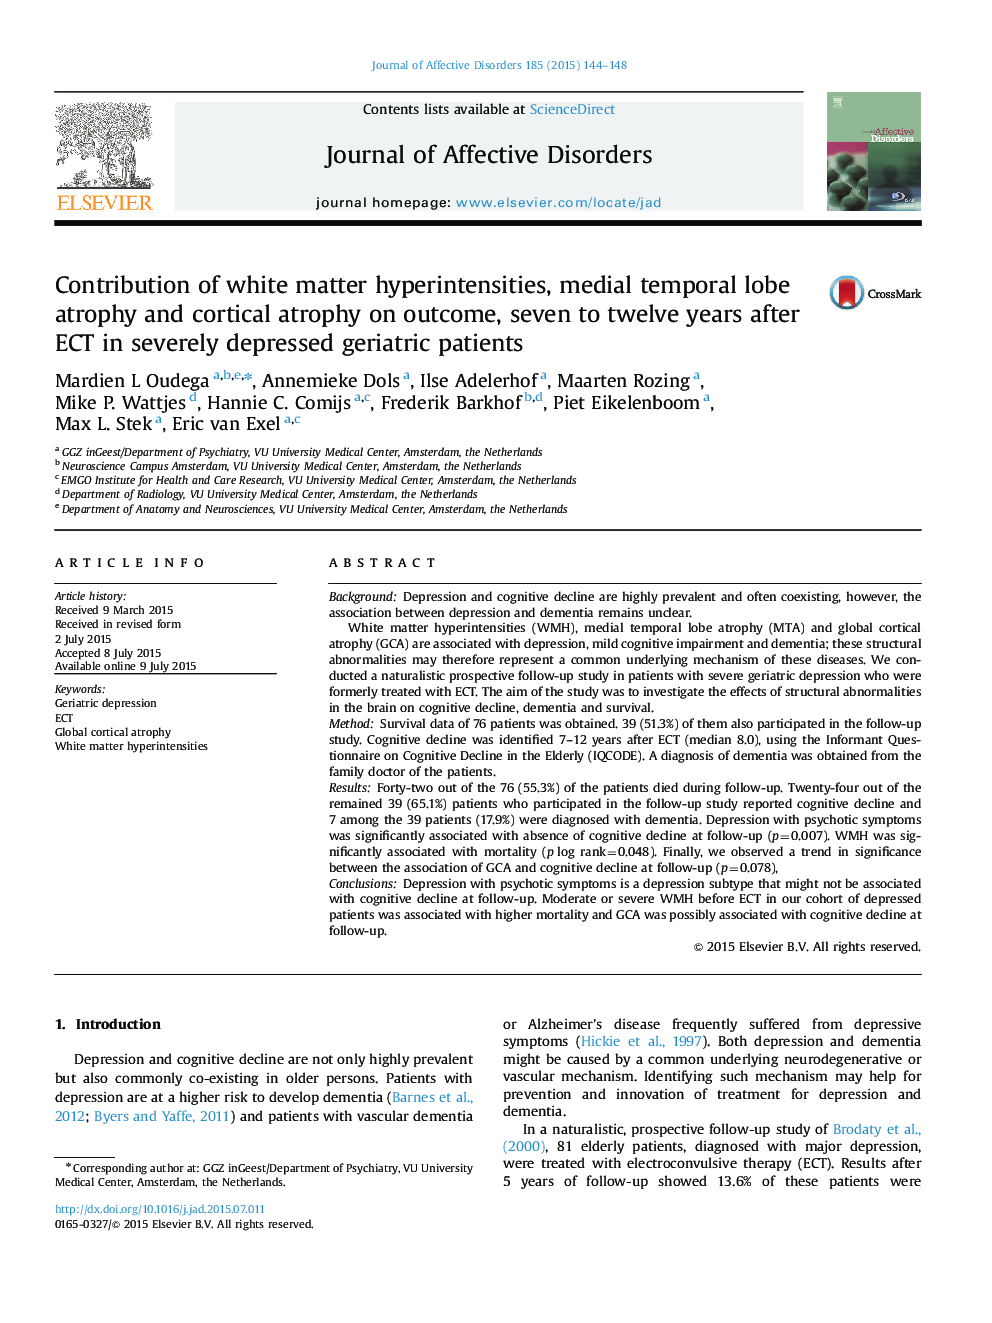 Contribution of white matter hyperintensities, medial temporal lobe atrophy and cortical atrophy on outcome, seven to twelve years after ECT in severely depressed geriatric patients